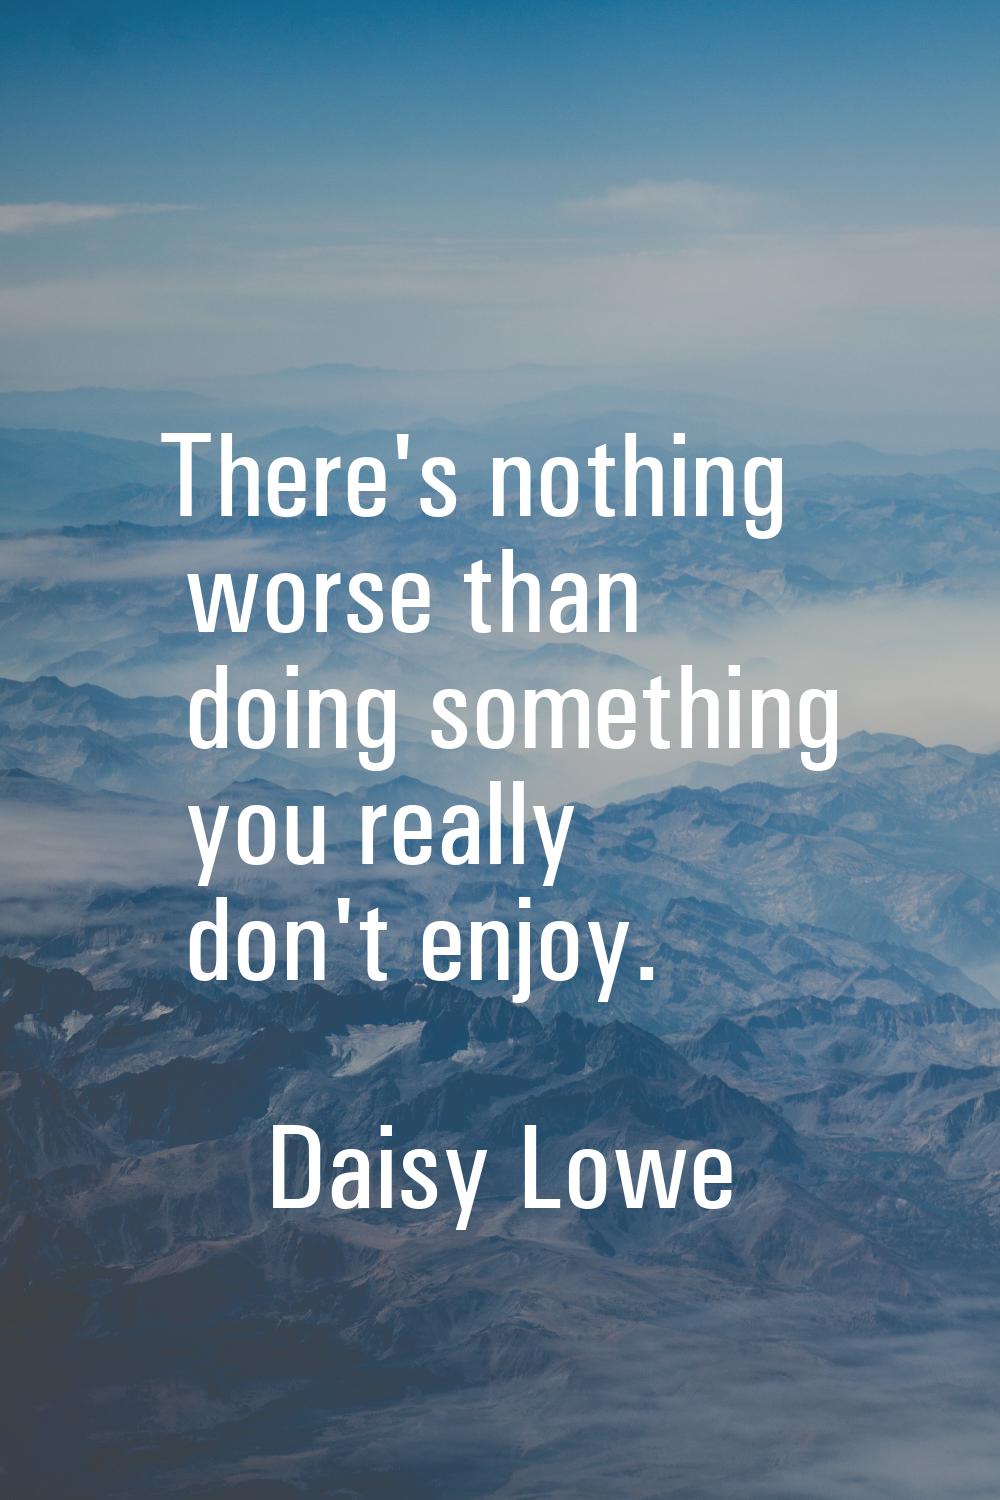 There's nothing worse than doing something you really don't enjoy.